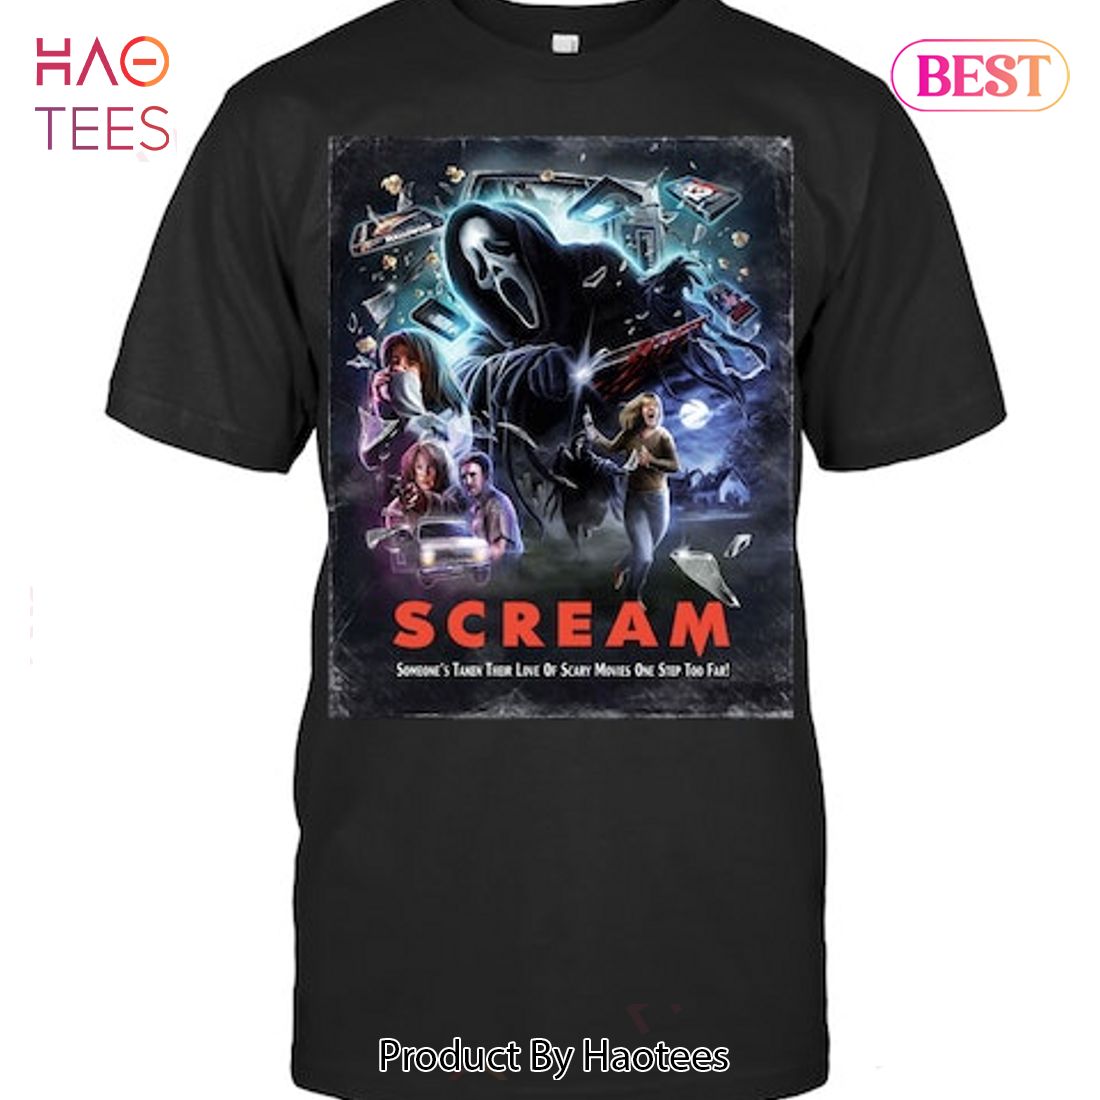 Scream Someone Taken Their Love Of Scary Movies One Step Too Far T-Shirt